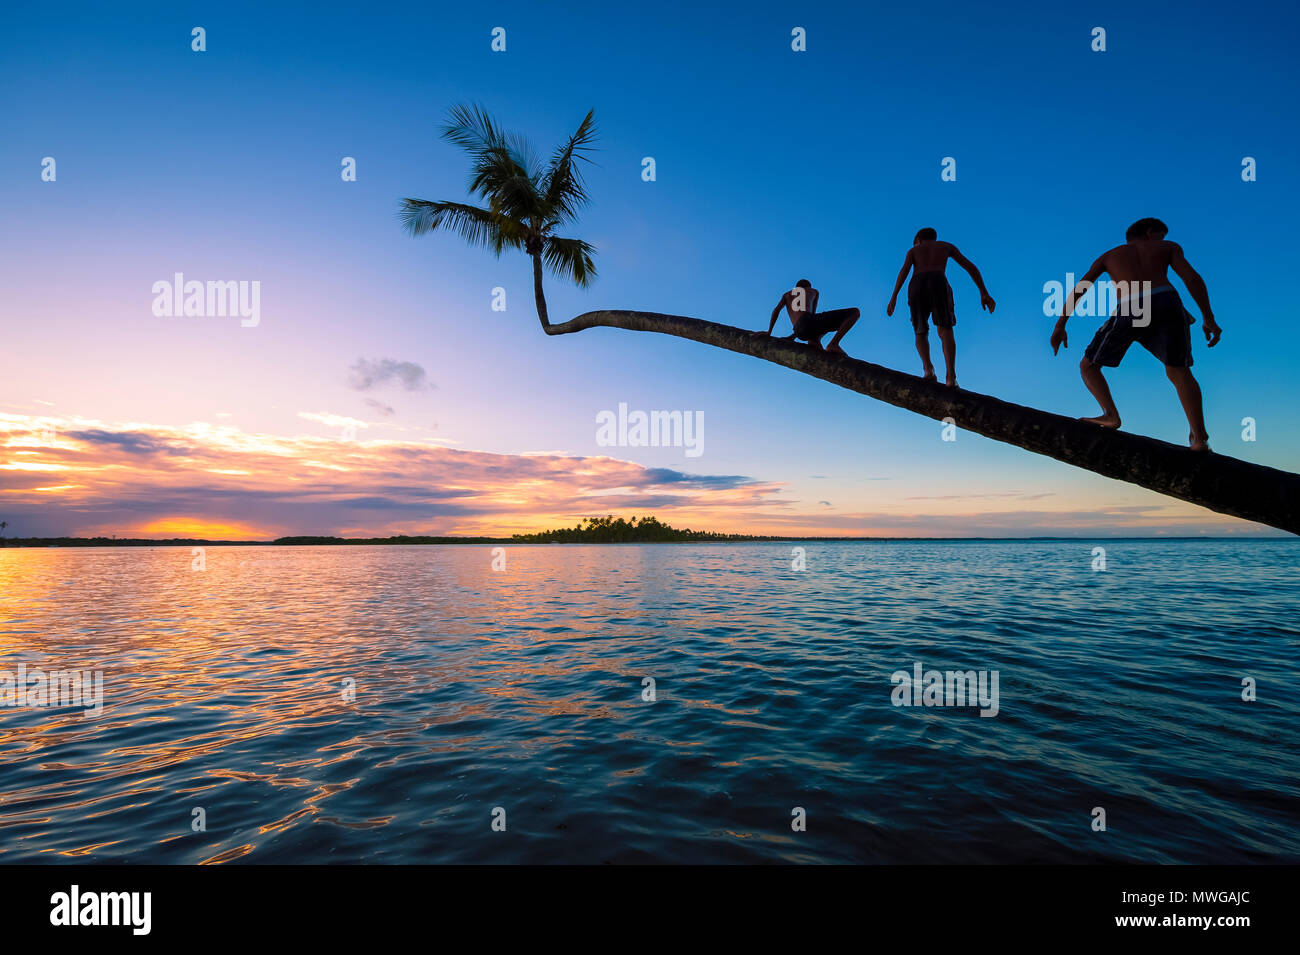 Silhouettes of unrecognizable young guys climb a coconut palm tree overhanging calm tropical waters at sunset. Stock Photo